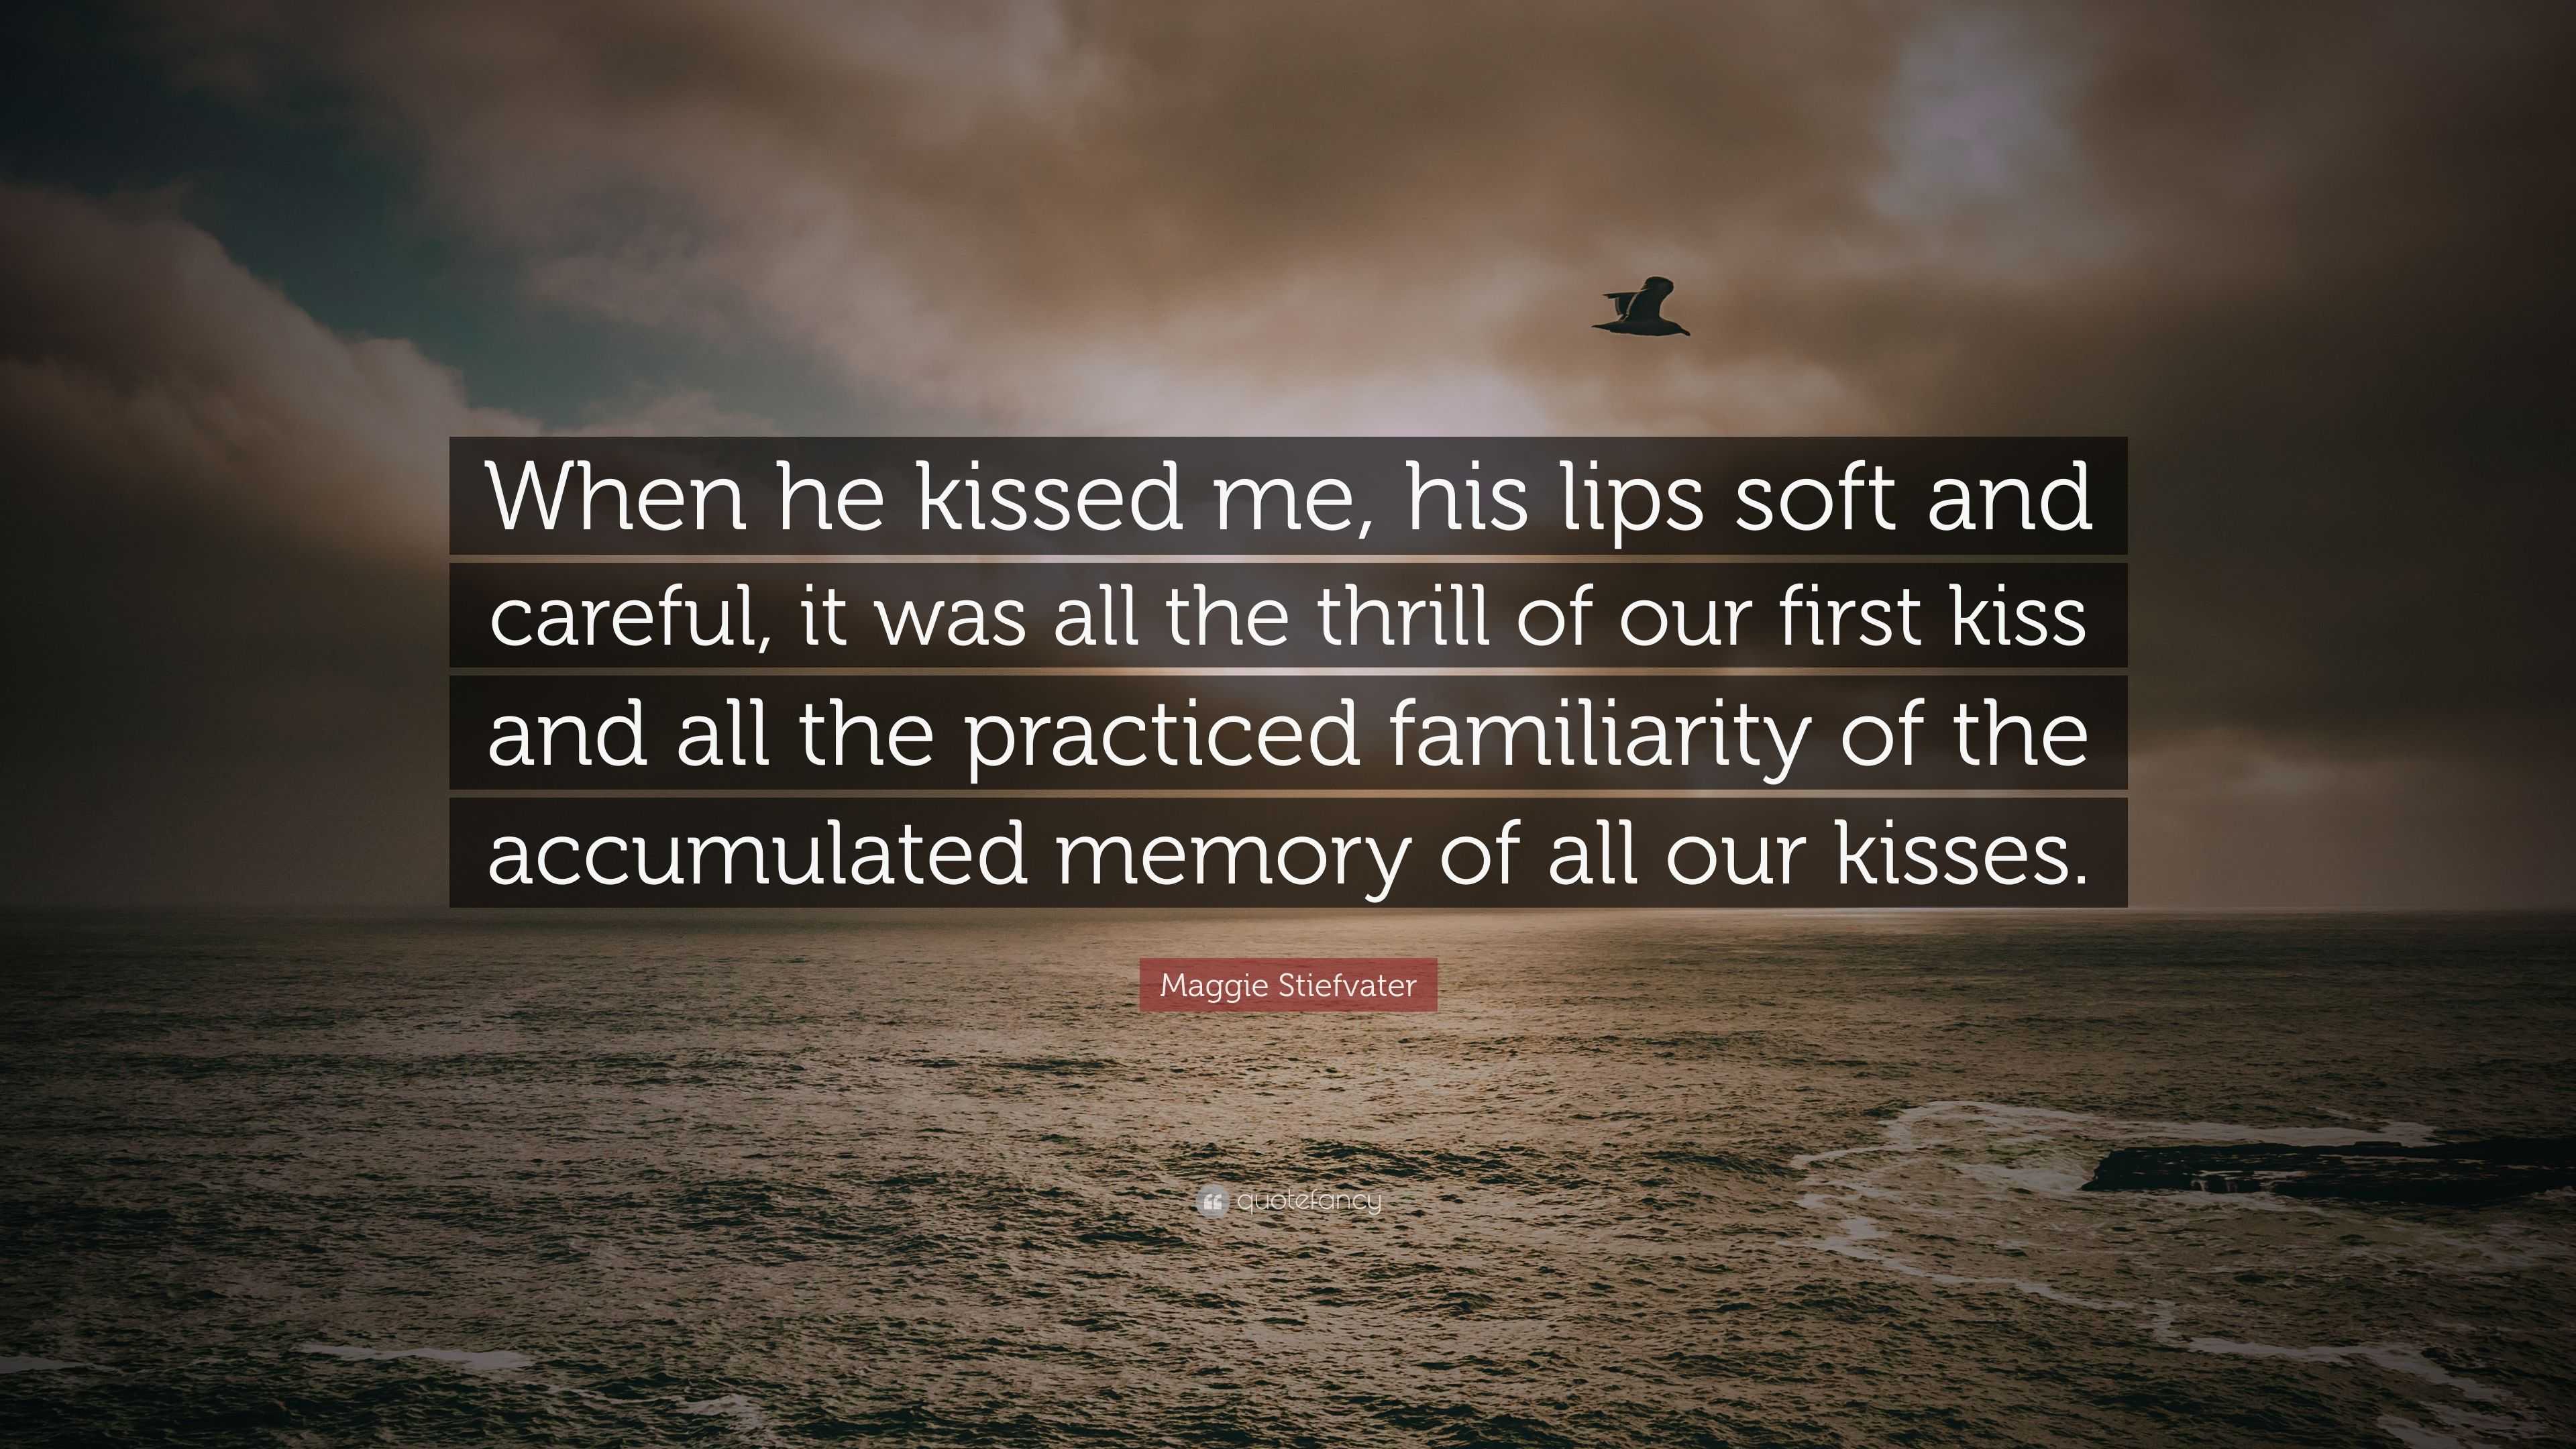 https://quotefancy.com/media/wallpaper/3840x2160/6160592-Maggie-Stiefvater-Quote-When-he-kissed-me-his-lips-soft-and.jpg